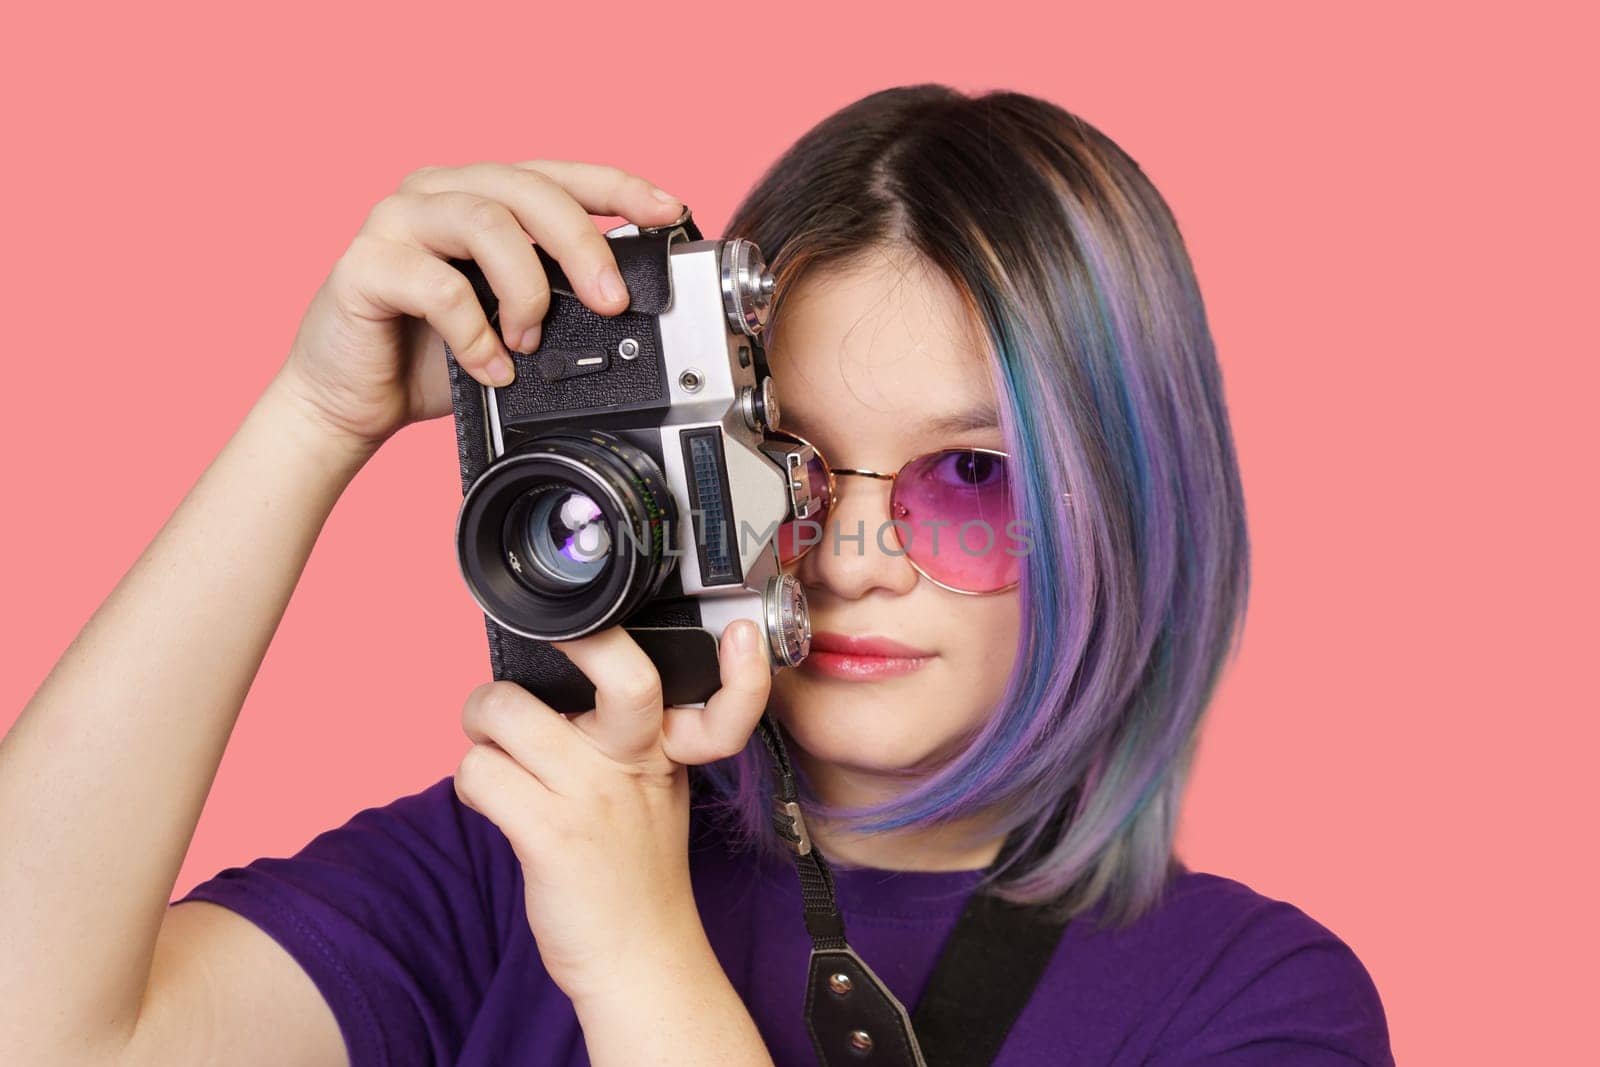 Teenager asian girl with old school photo camera against vibrant pink background. Youthful enthusiasm for photography, combining modern era with vintage charm of analog camera. close-up portrait by LipikStockMedia